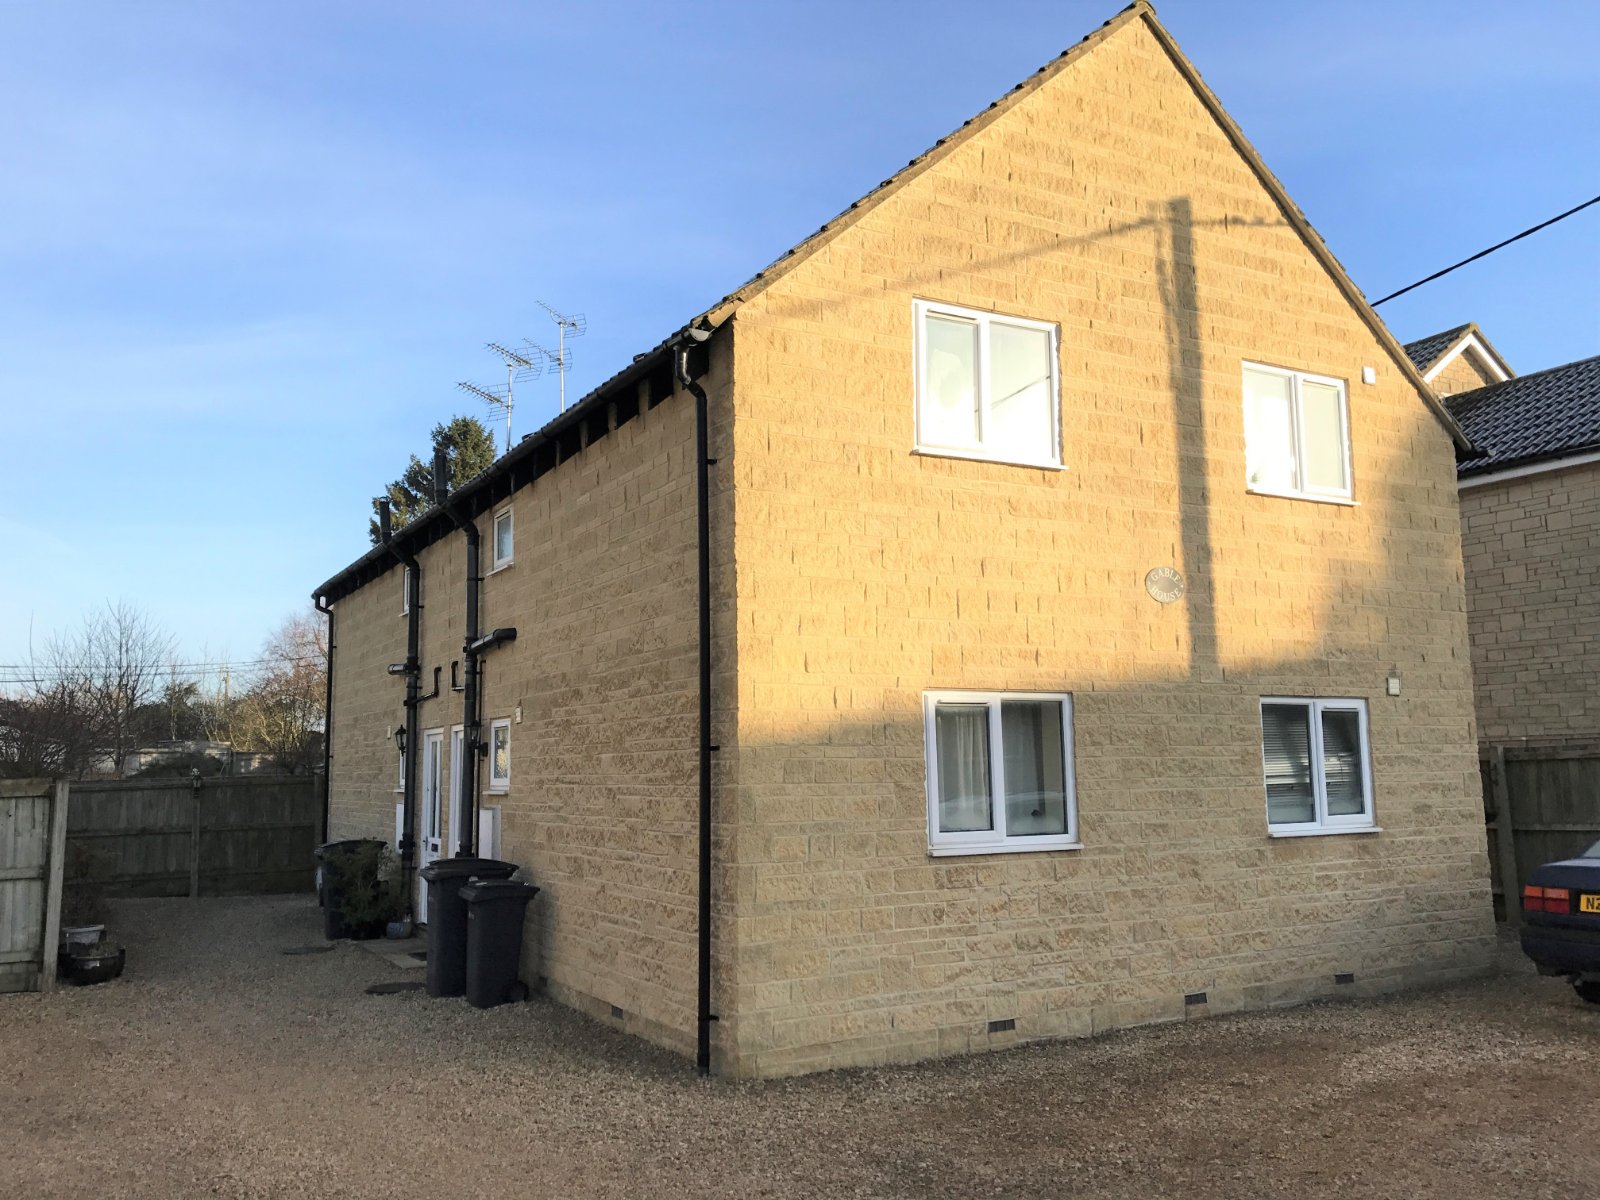 Bowling Green Road, Cirencester, Gloucestershire, GL7